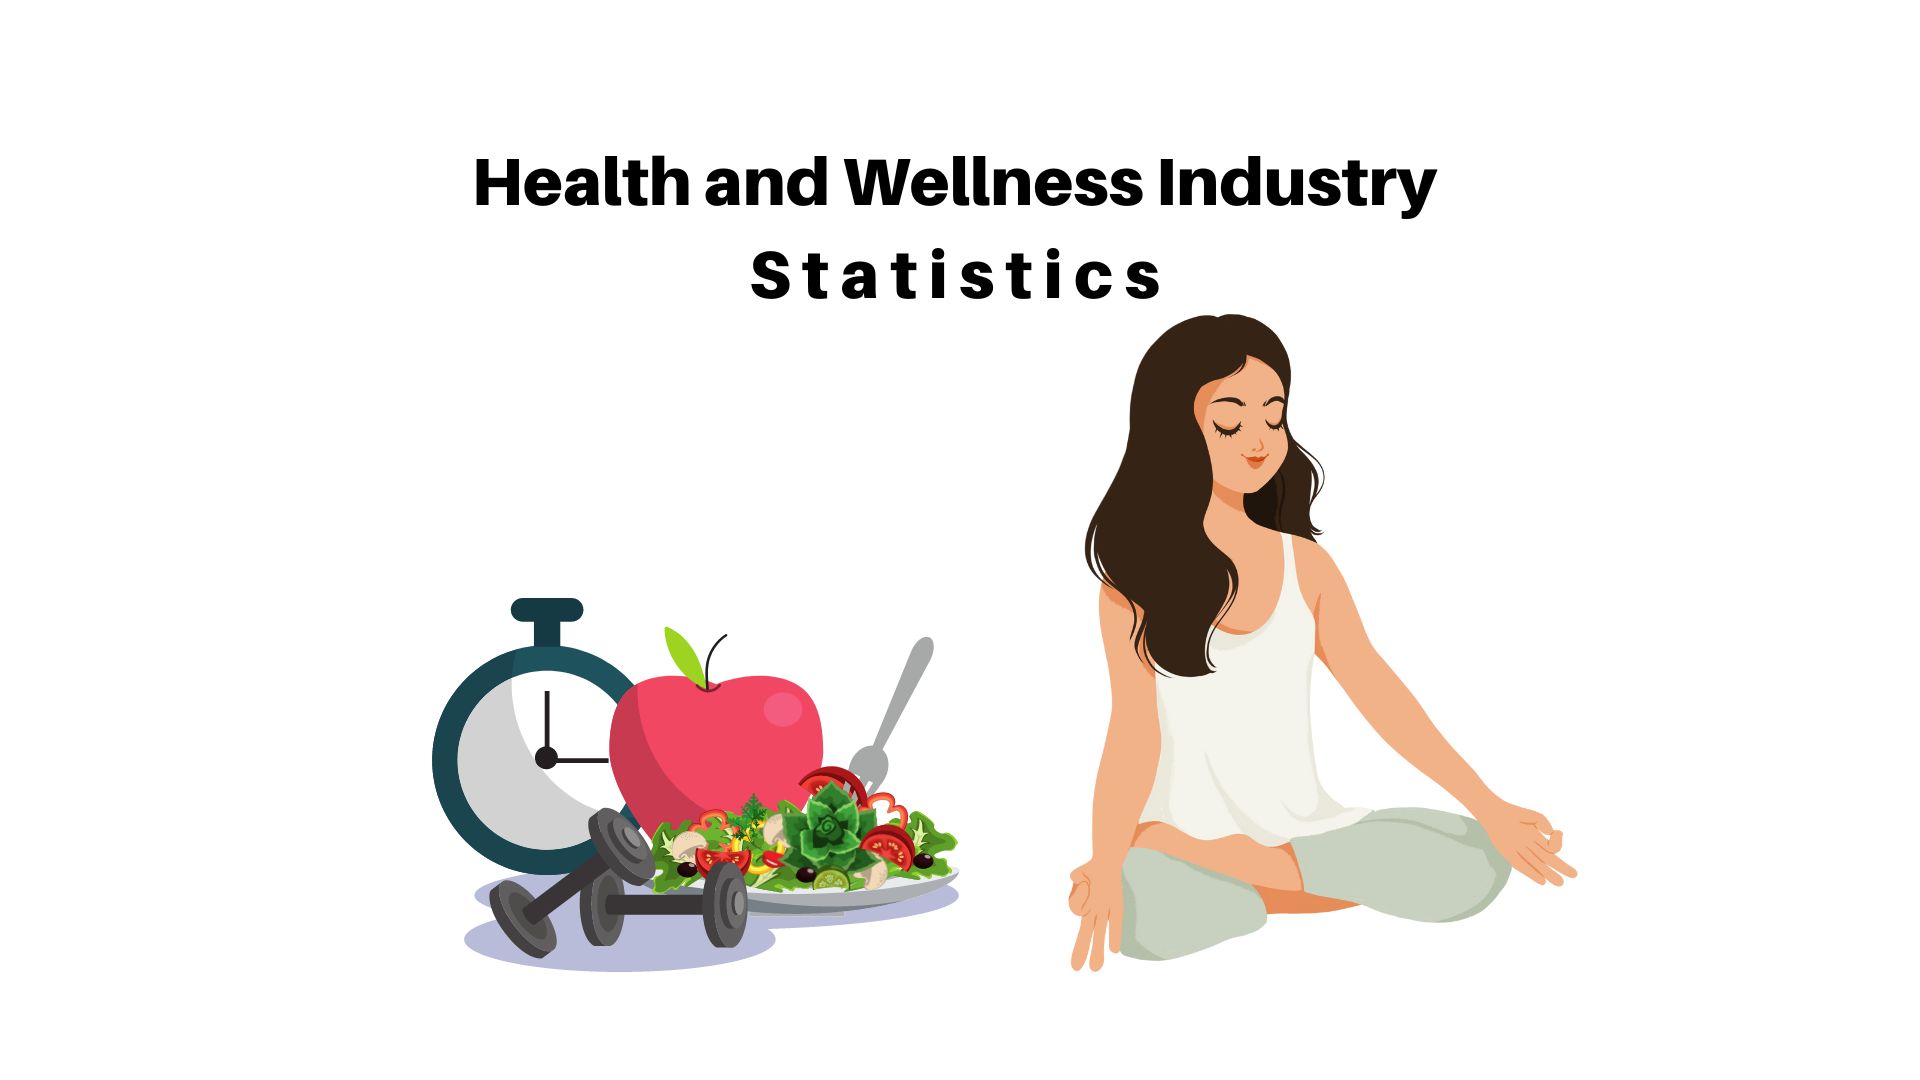 Health and Wellness Industry Statistics By Apps, Spending and Products